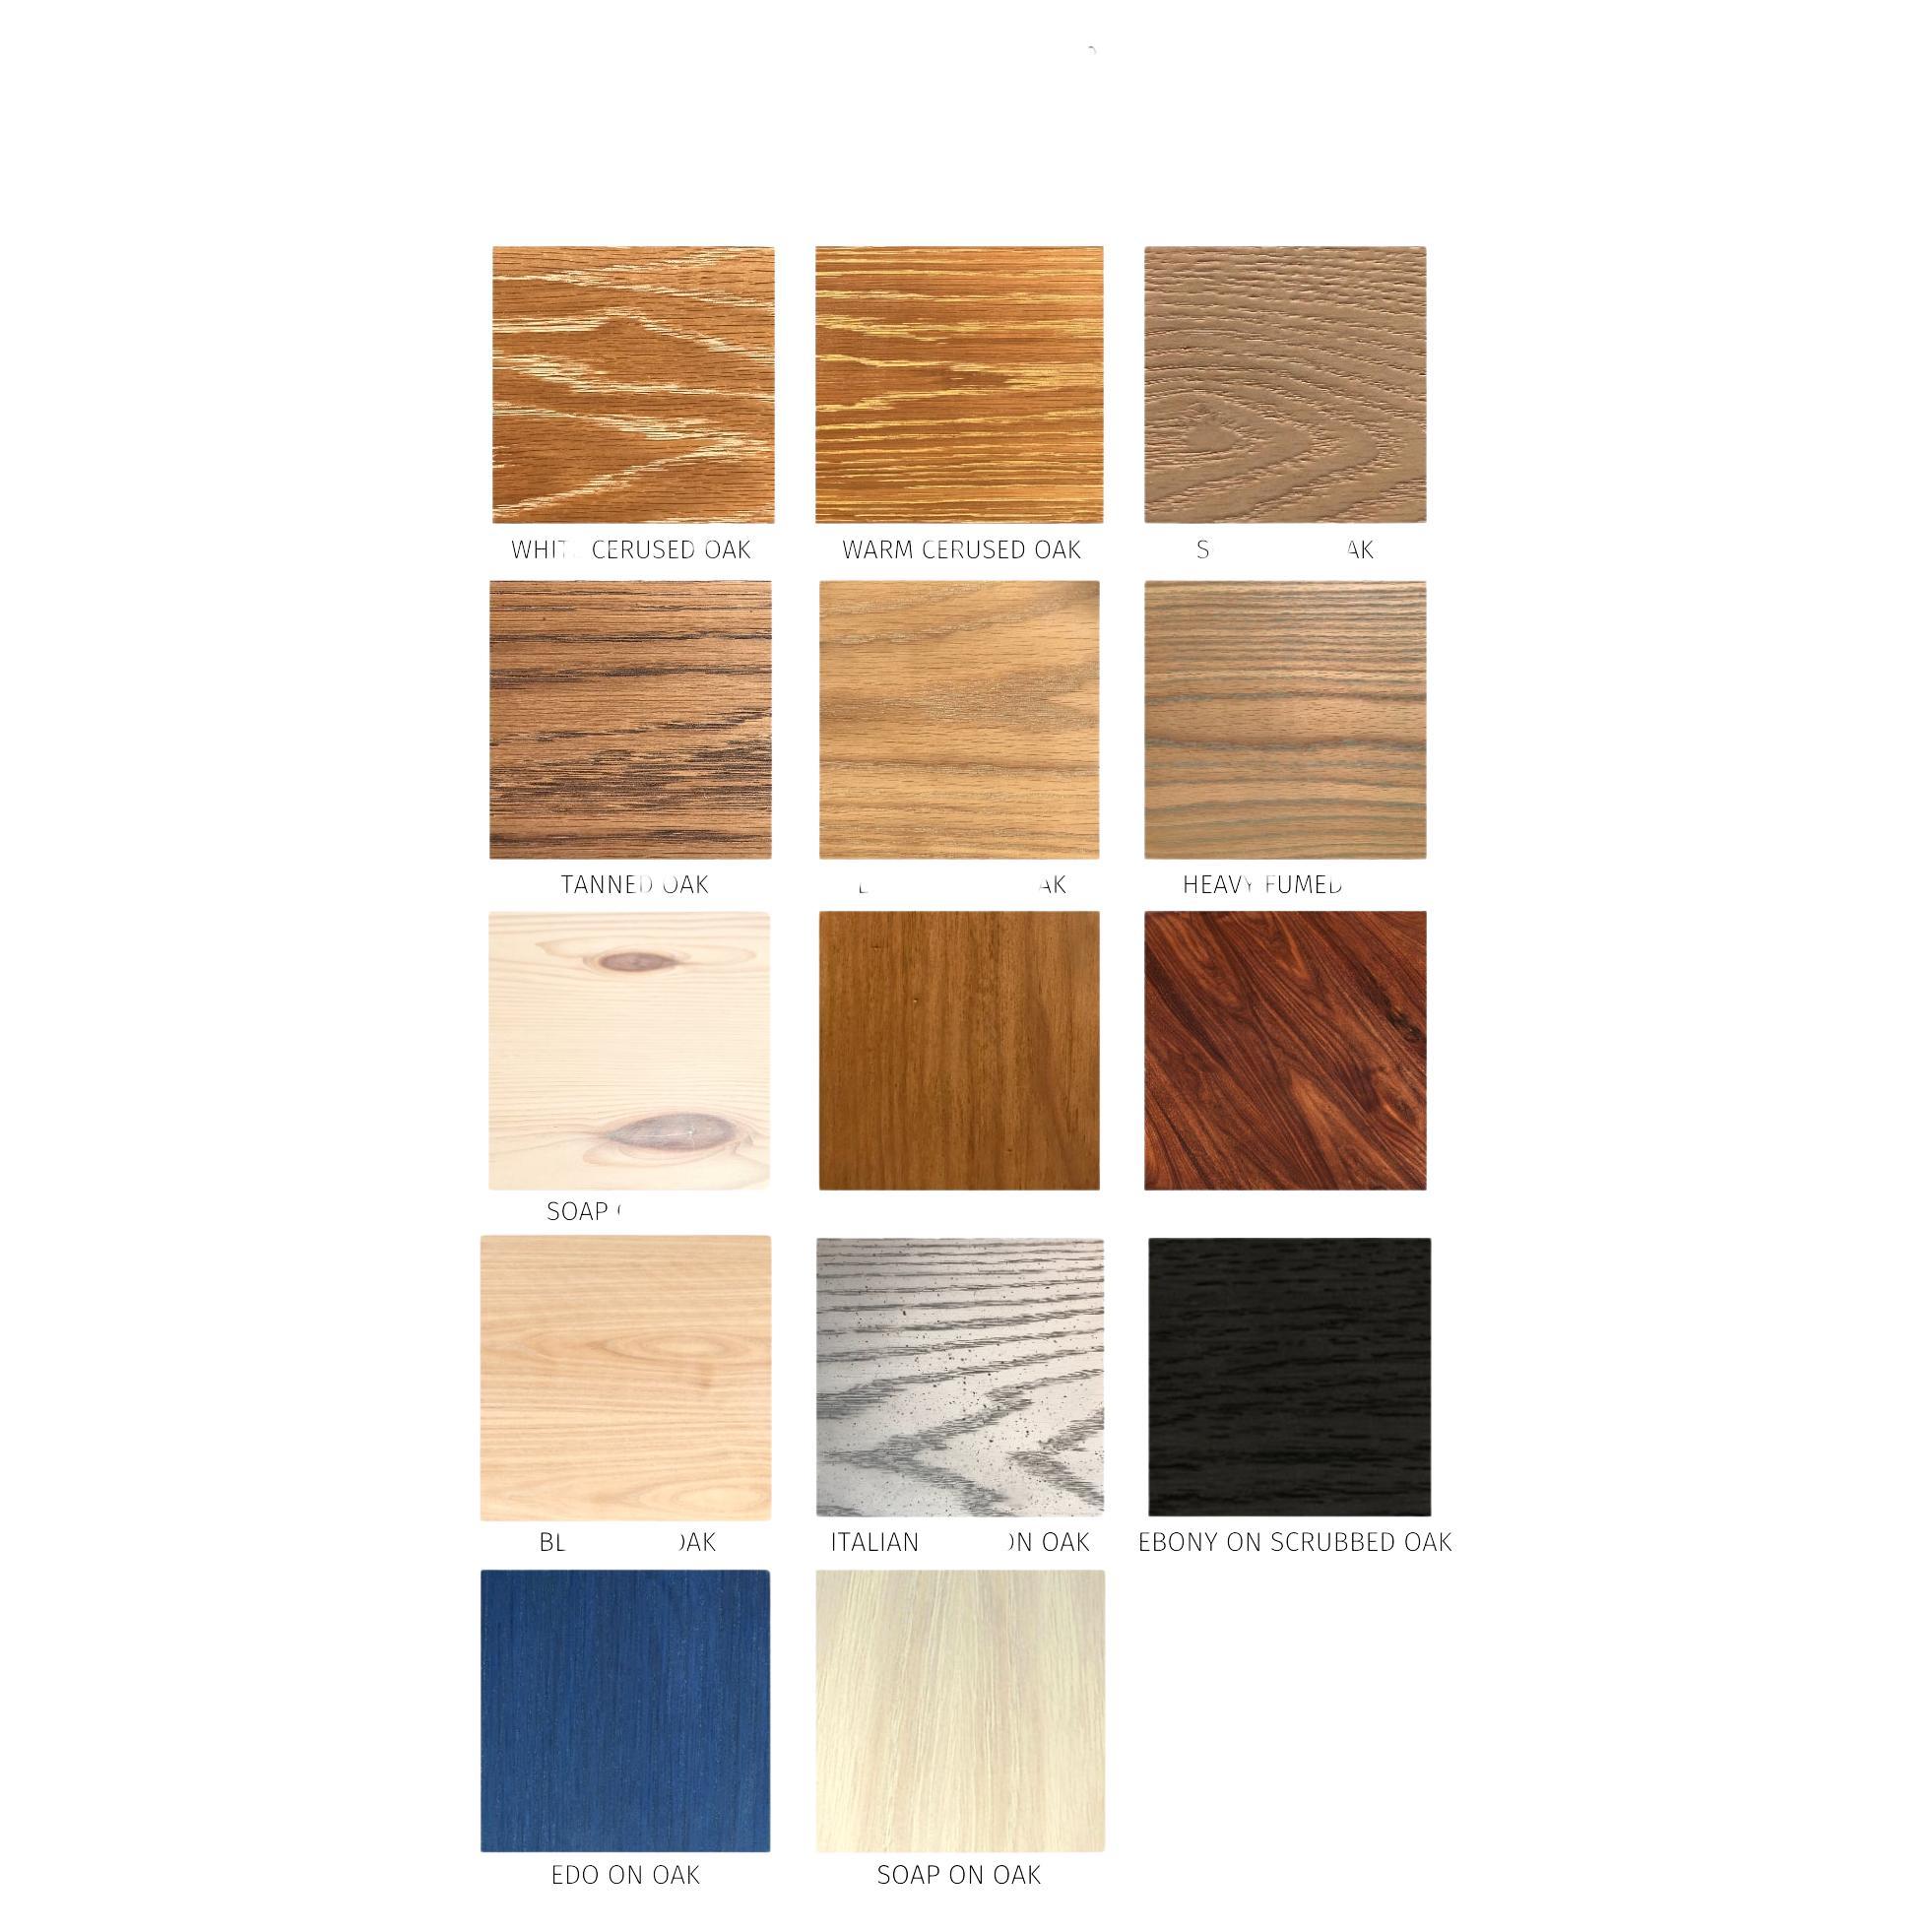 Finish samples are sold per sample, not a set. When ordering please specify which finish you'd like.